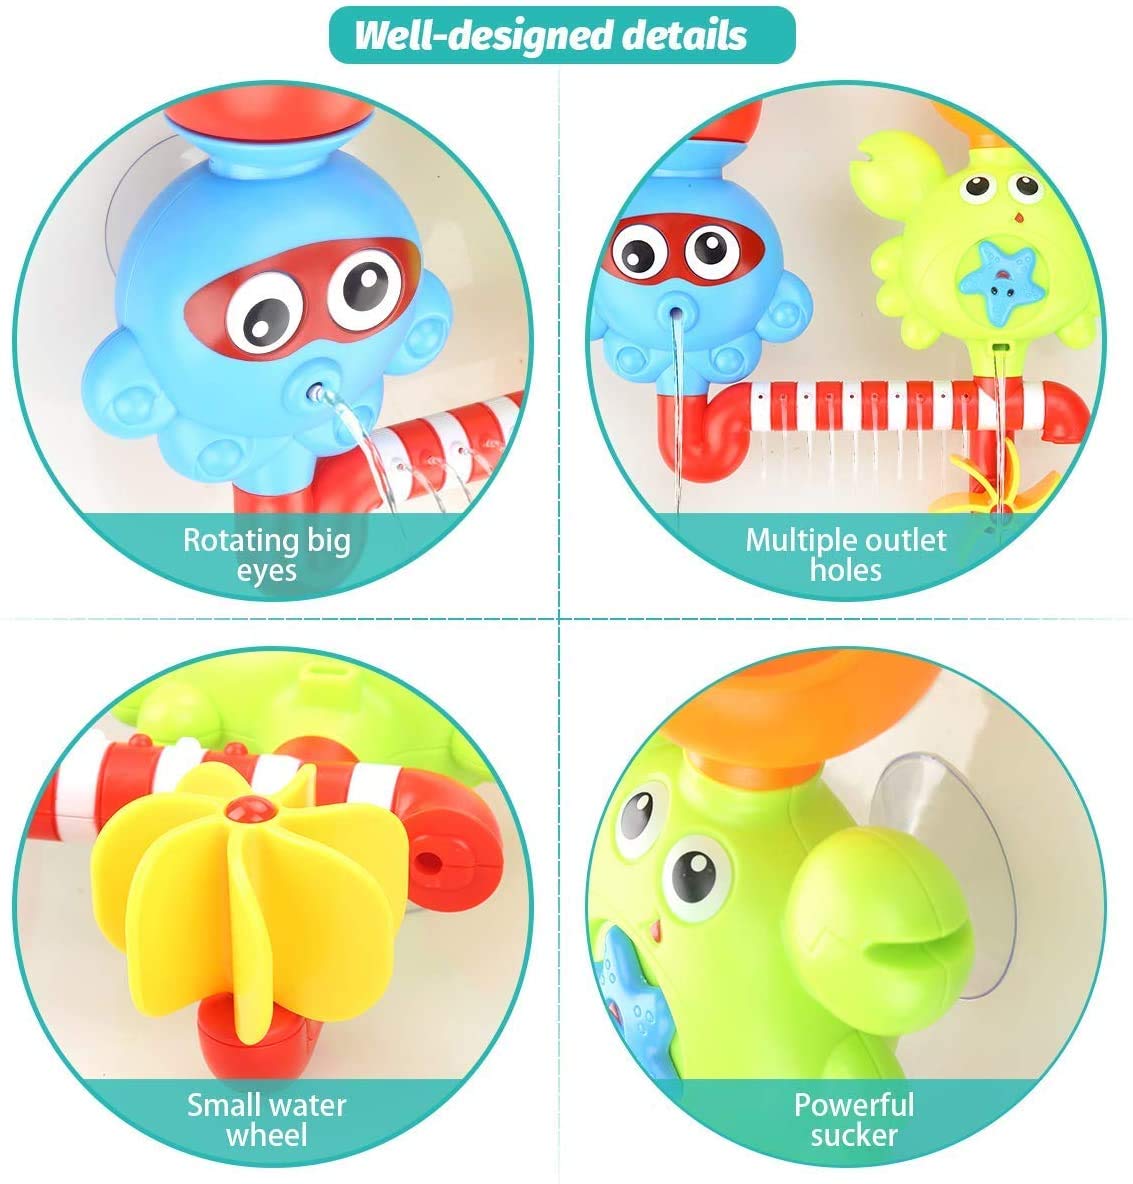 GOODLOGO Bath Toys Bathtub Toys for 1 2 3 4 Year Old Kids Toddlers Bath Wall Toy Waterfall Fill Spin and Flow Non Toxic Birthday Gift Ideas Color Box (Multicolor)